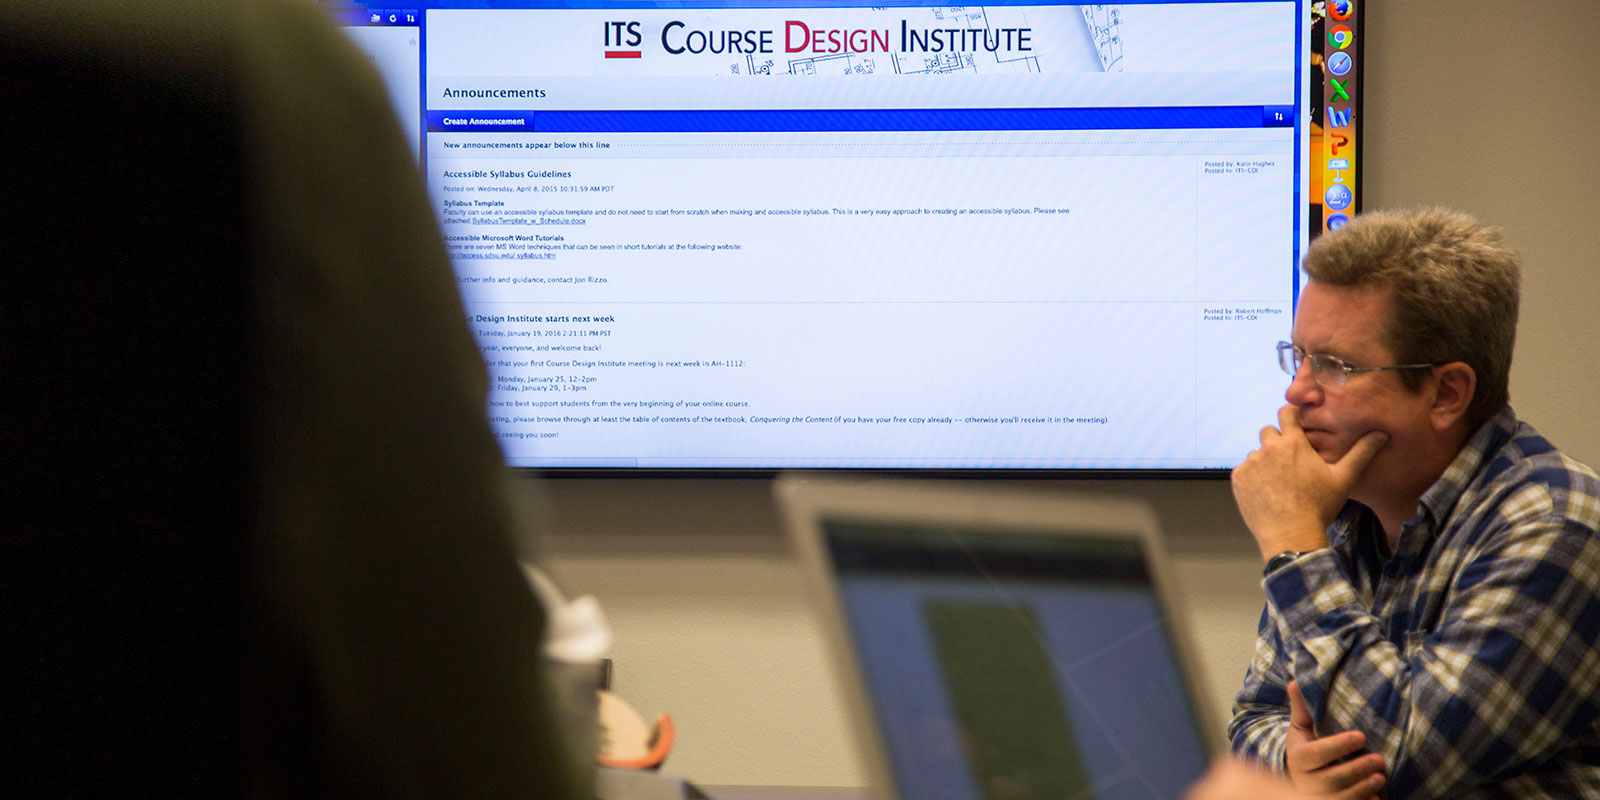 discussion on the ITS course design institute